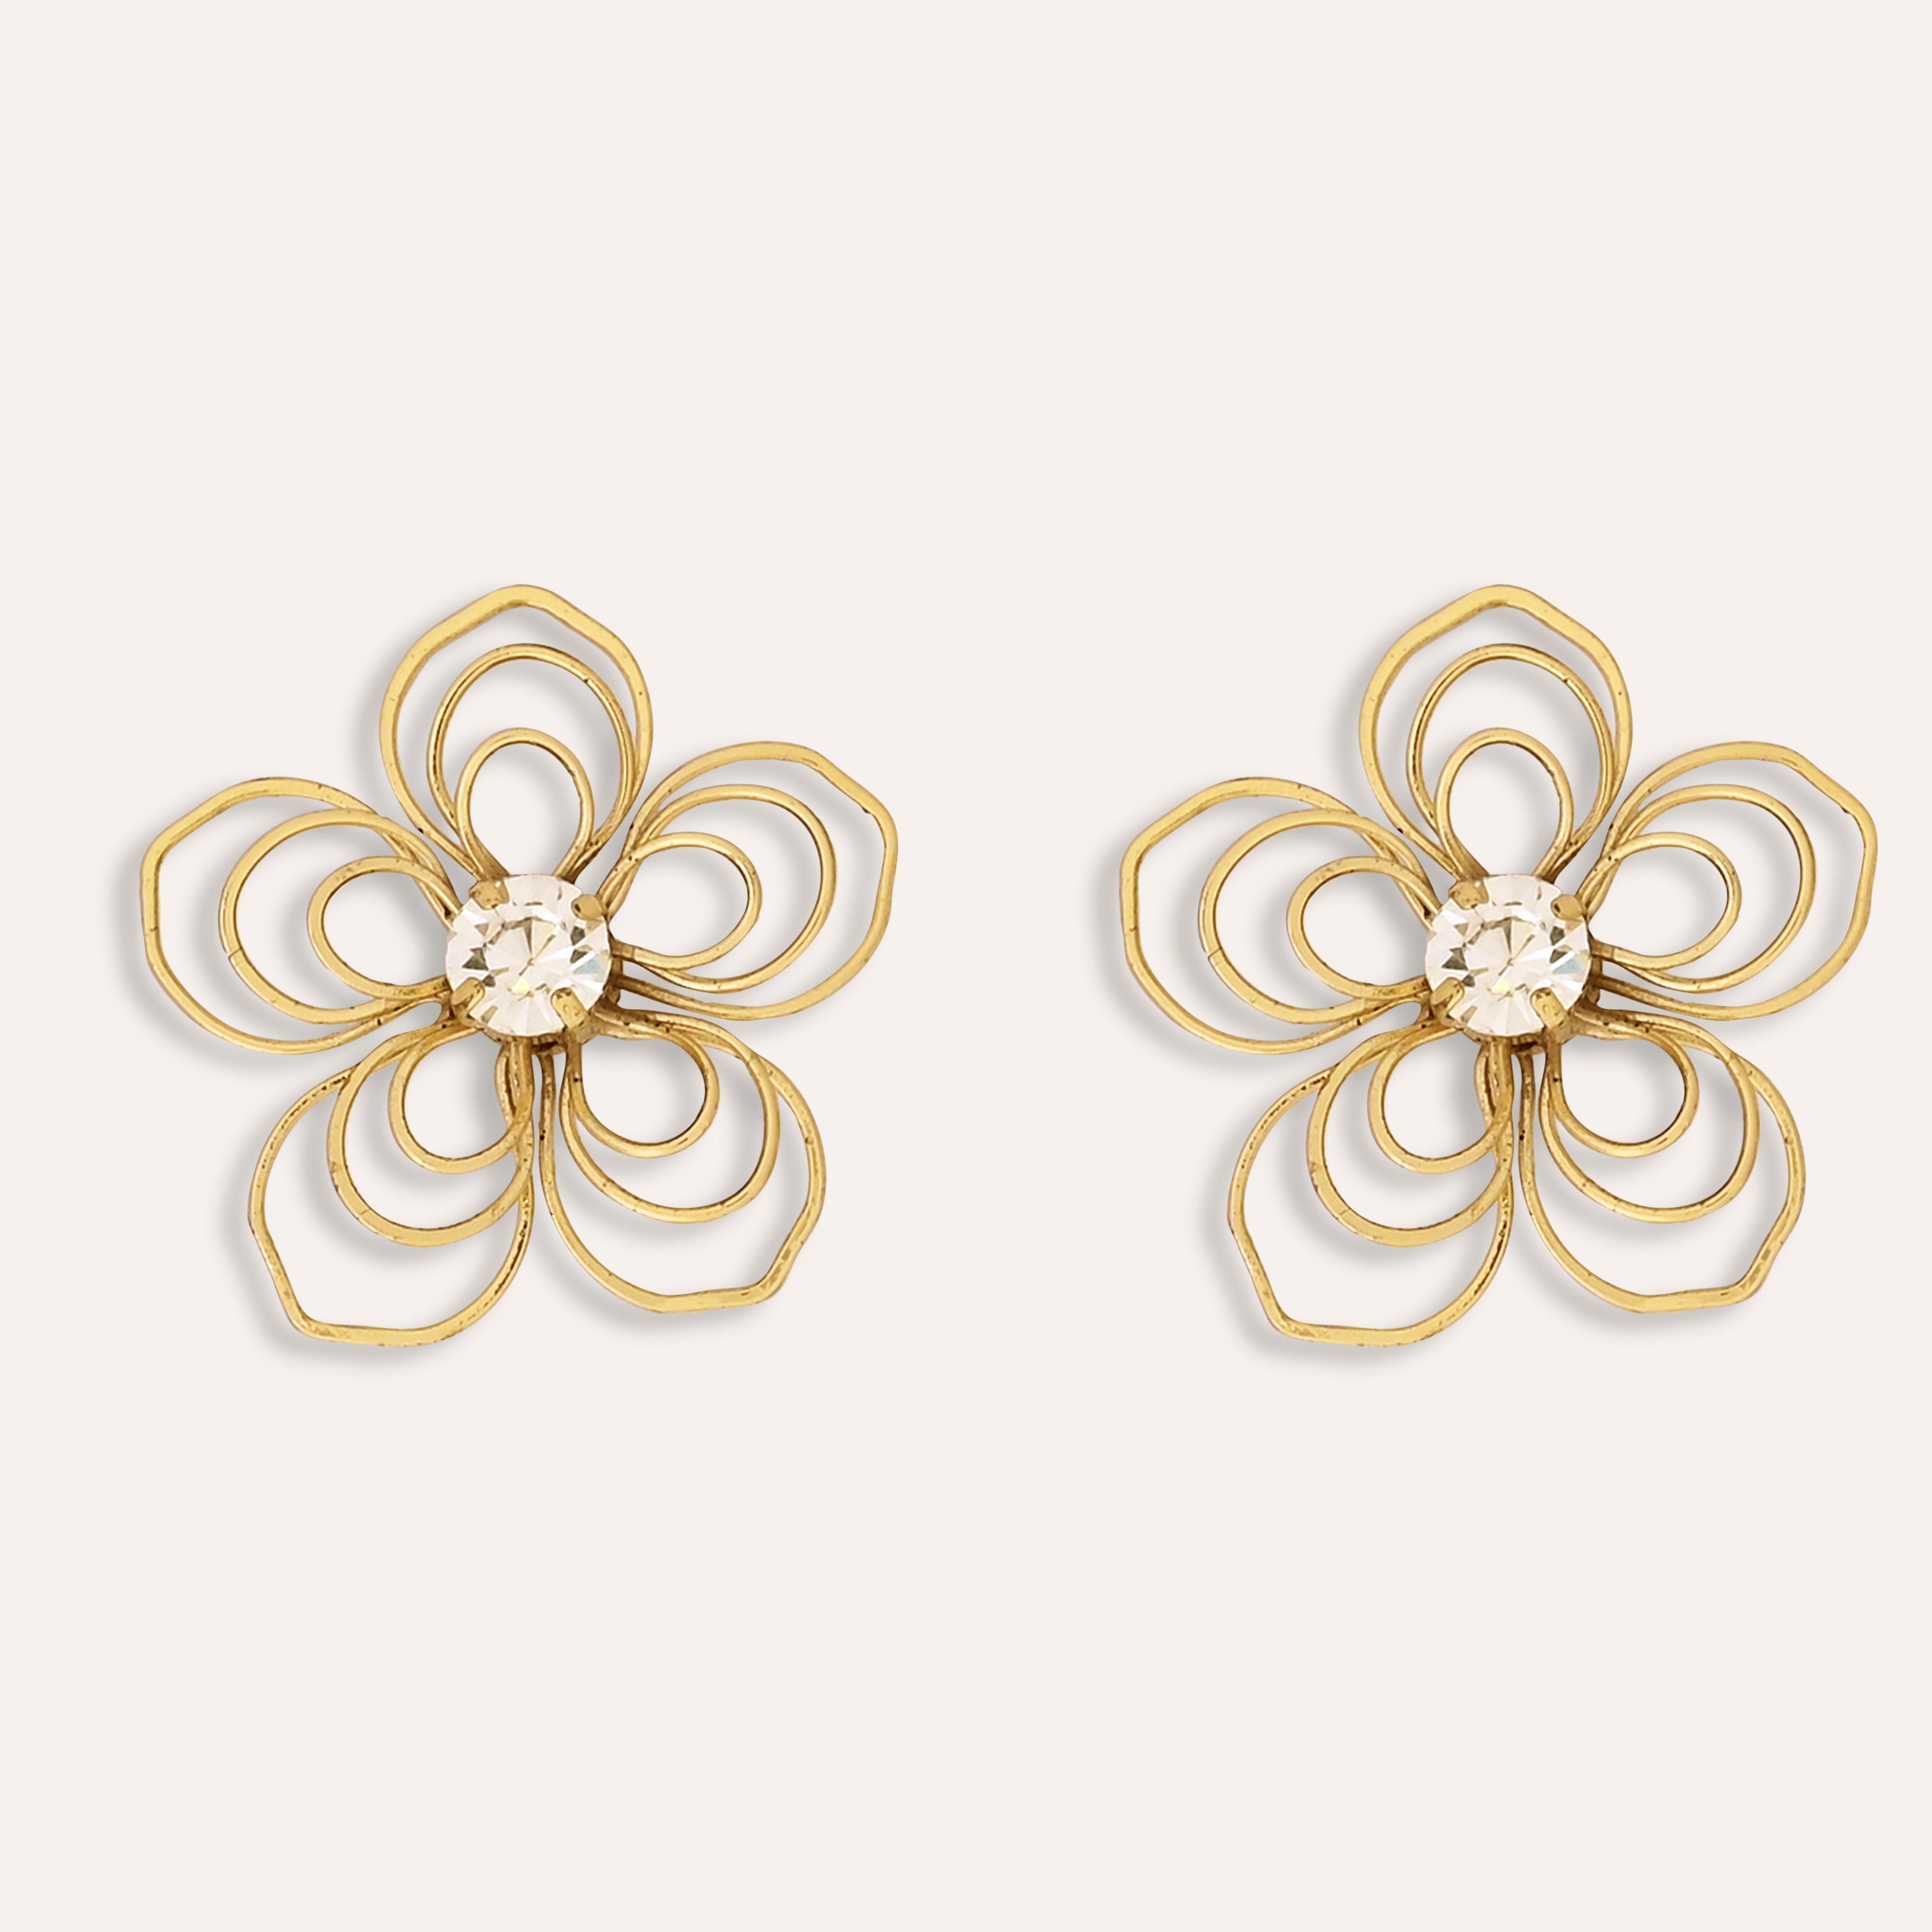 TFC Flower Power Gold Plated Stud Earrings- Discover daily wear gold earrings including stud earrings, hoop earrings, and pearl earrings, perfect as earrings for women and earrings for girls.Find the cheapest fashion jewellery which is anti-tarnis​h only at The Fun company.